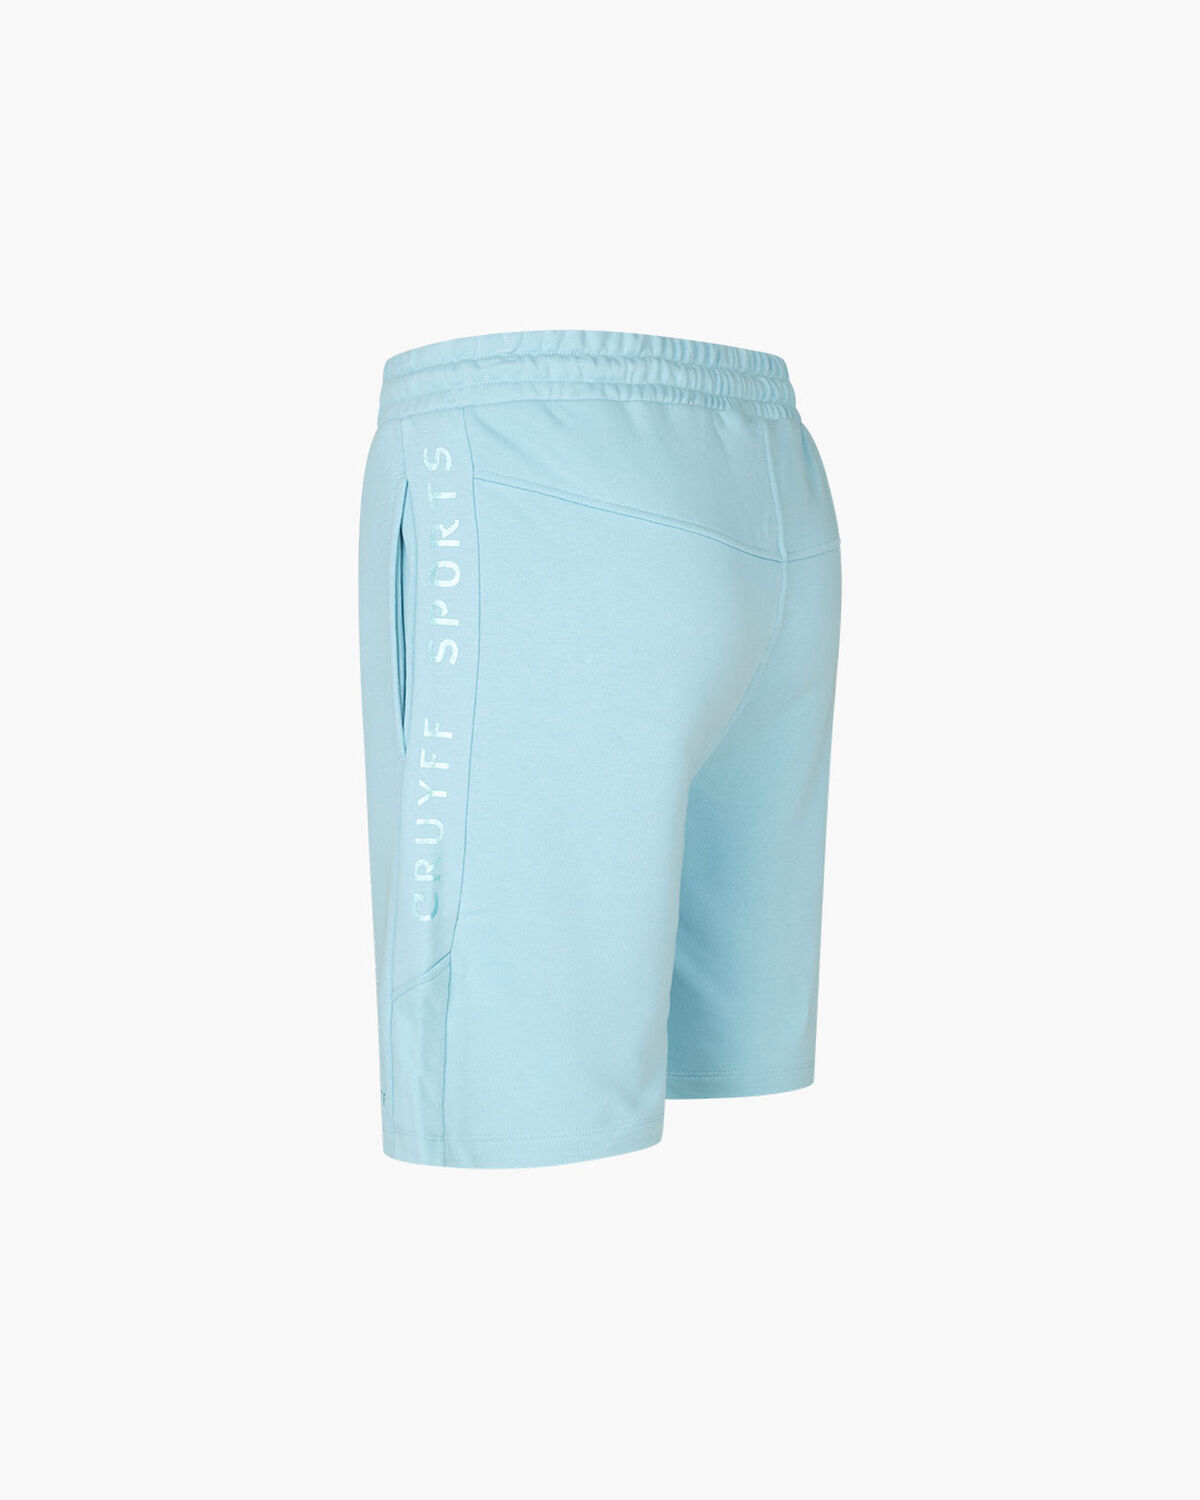 Booster Short - 80% Cotton/20% Polyester, Ice, hi-res